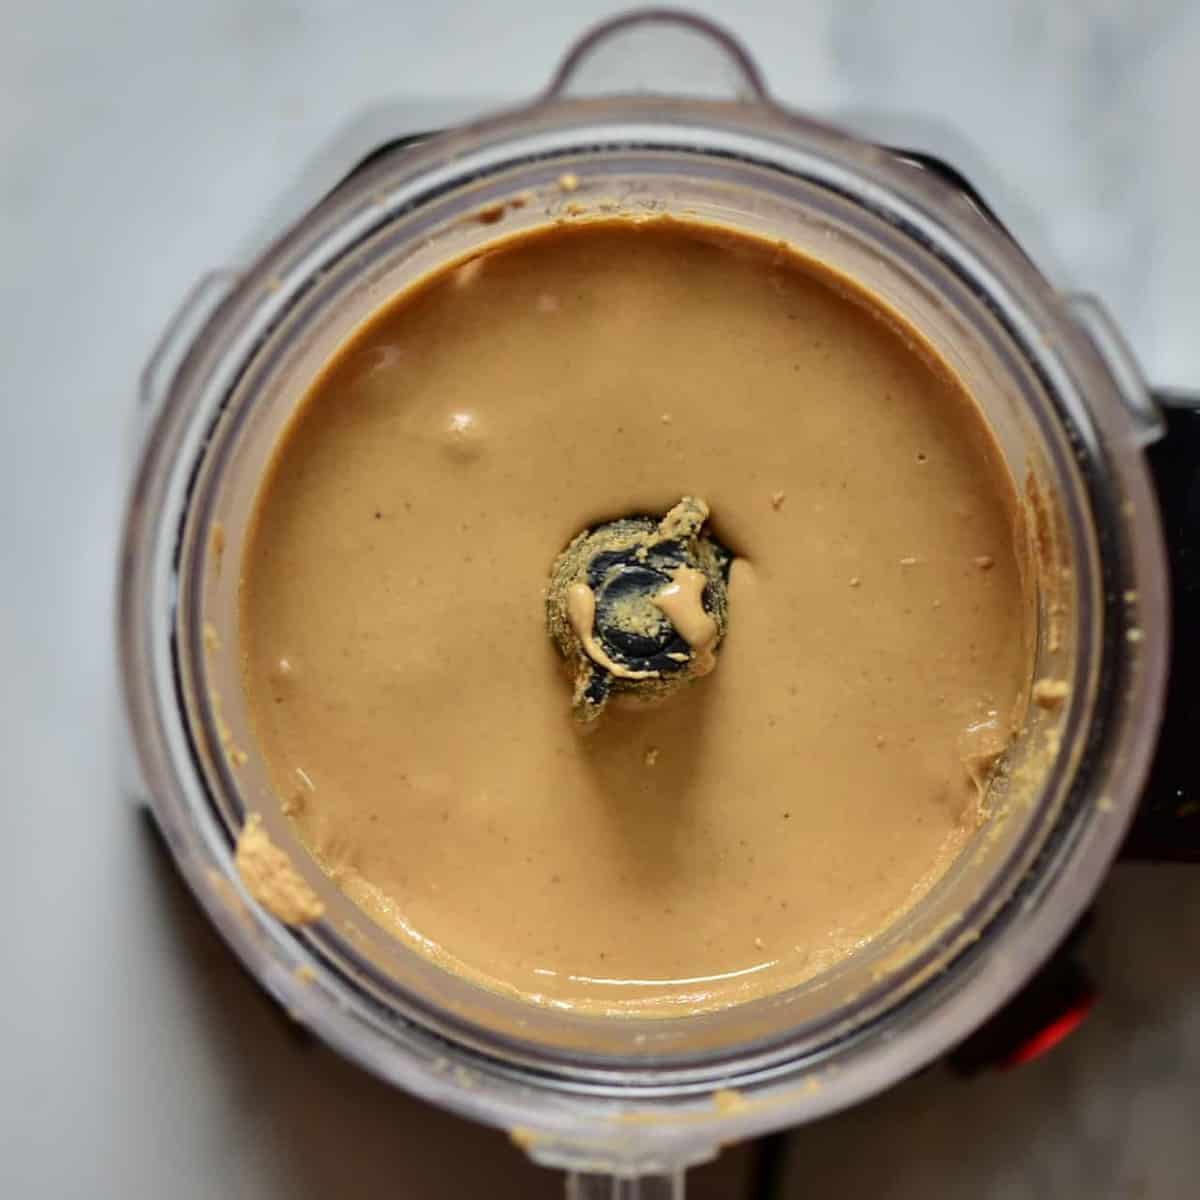 Delicious one inredinet homemade cashew butter recipe . Inlcuding flavoured cashew butter options as well as how to use cashew butter 